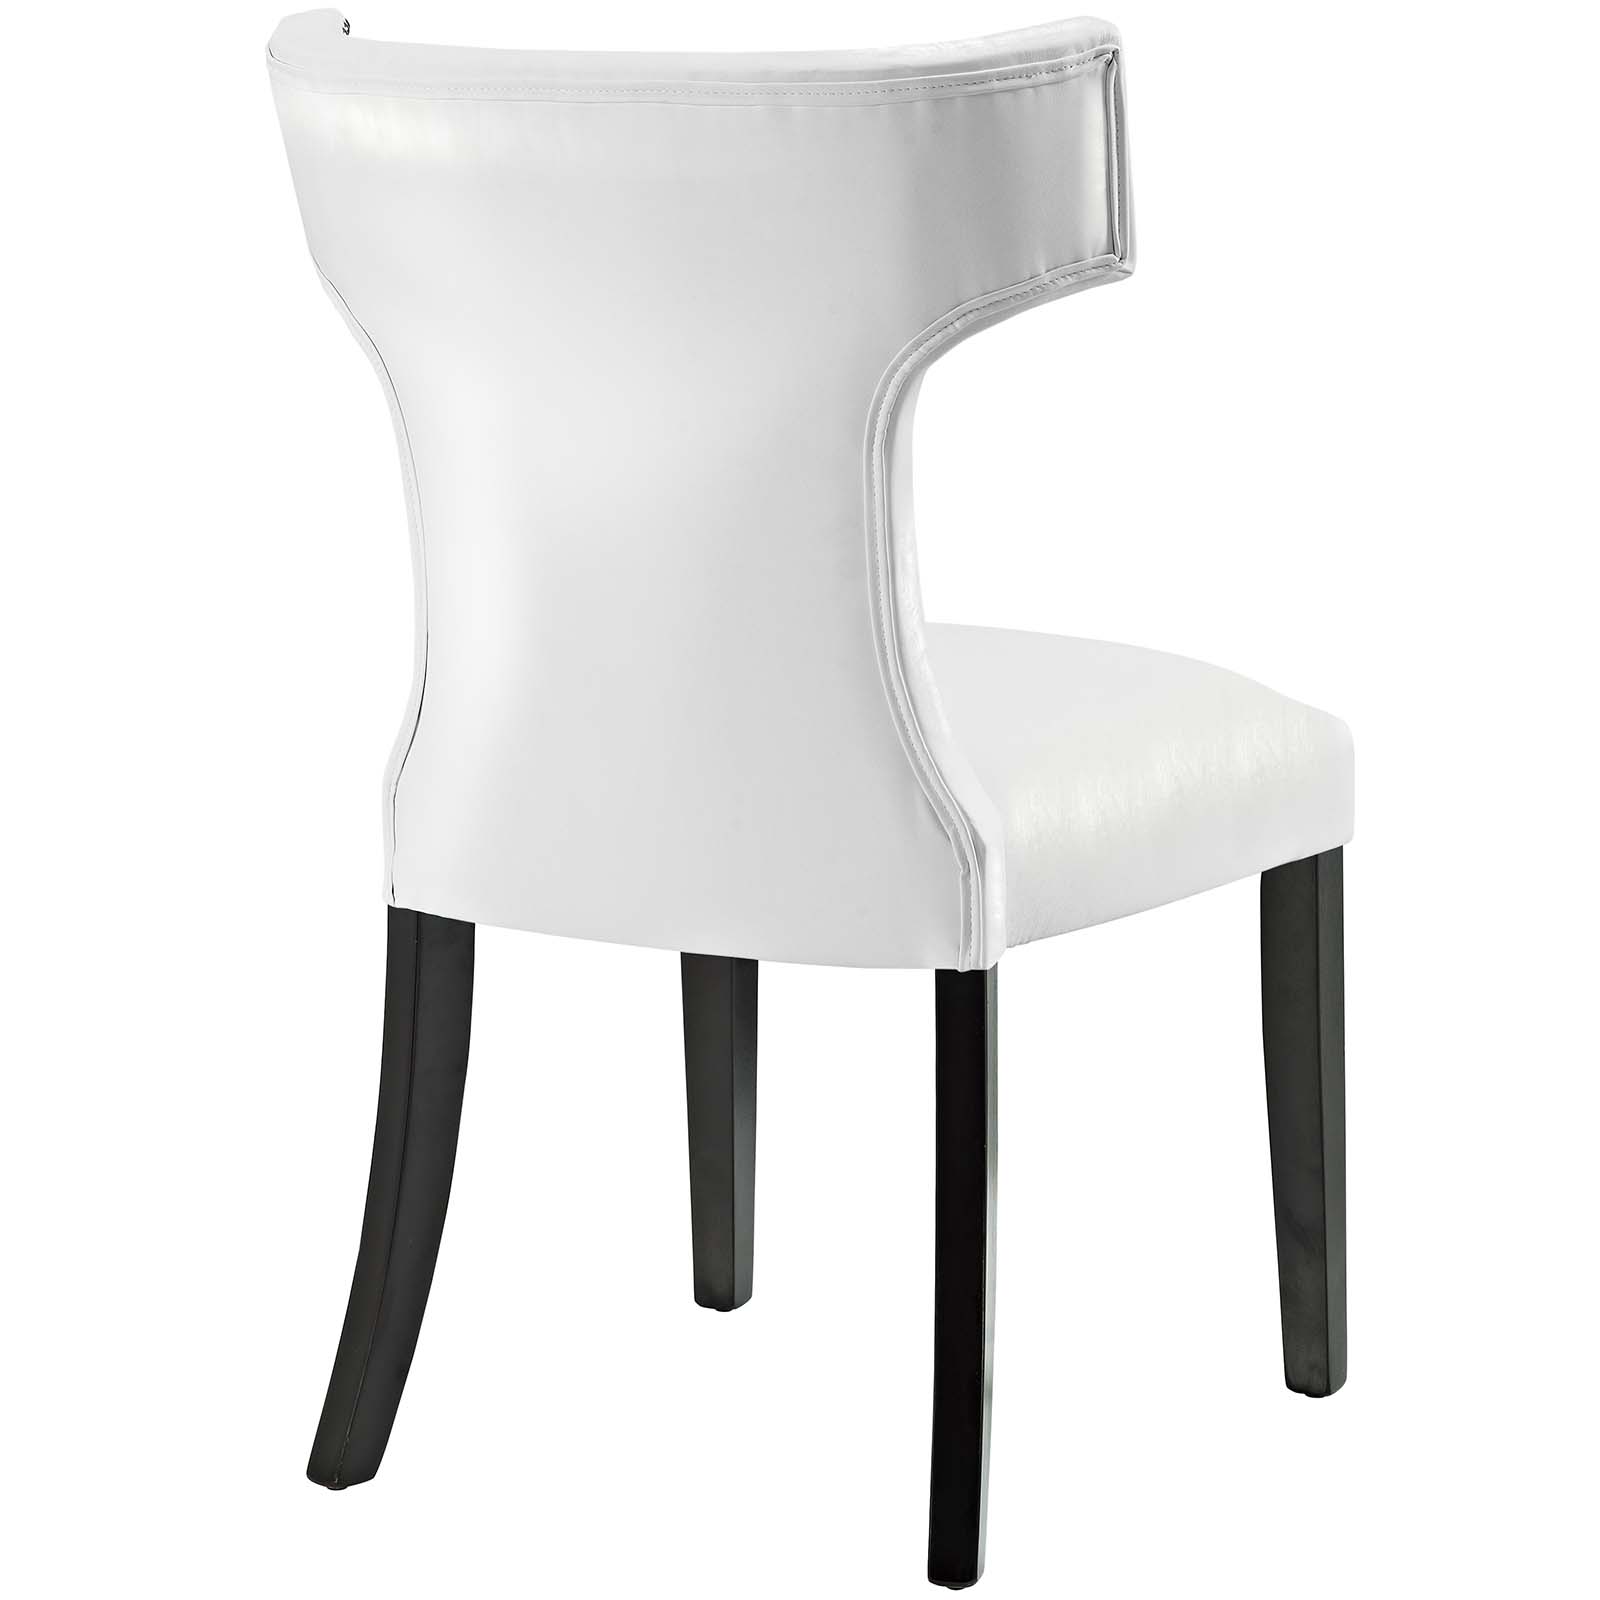 Modway Curve Vinyl Dining Chair in White